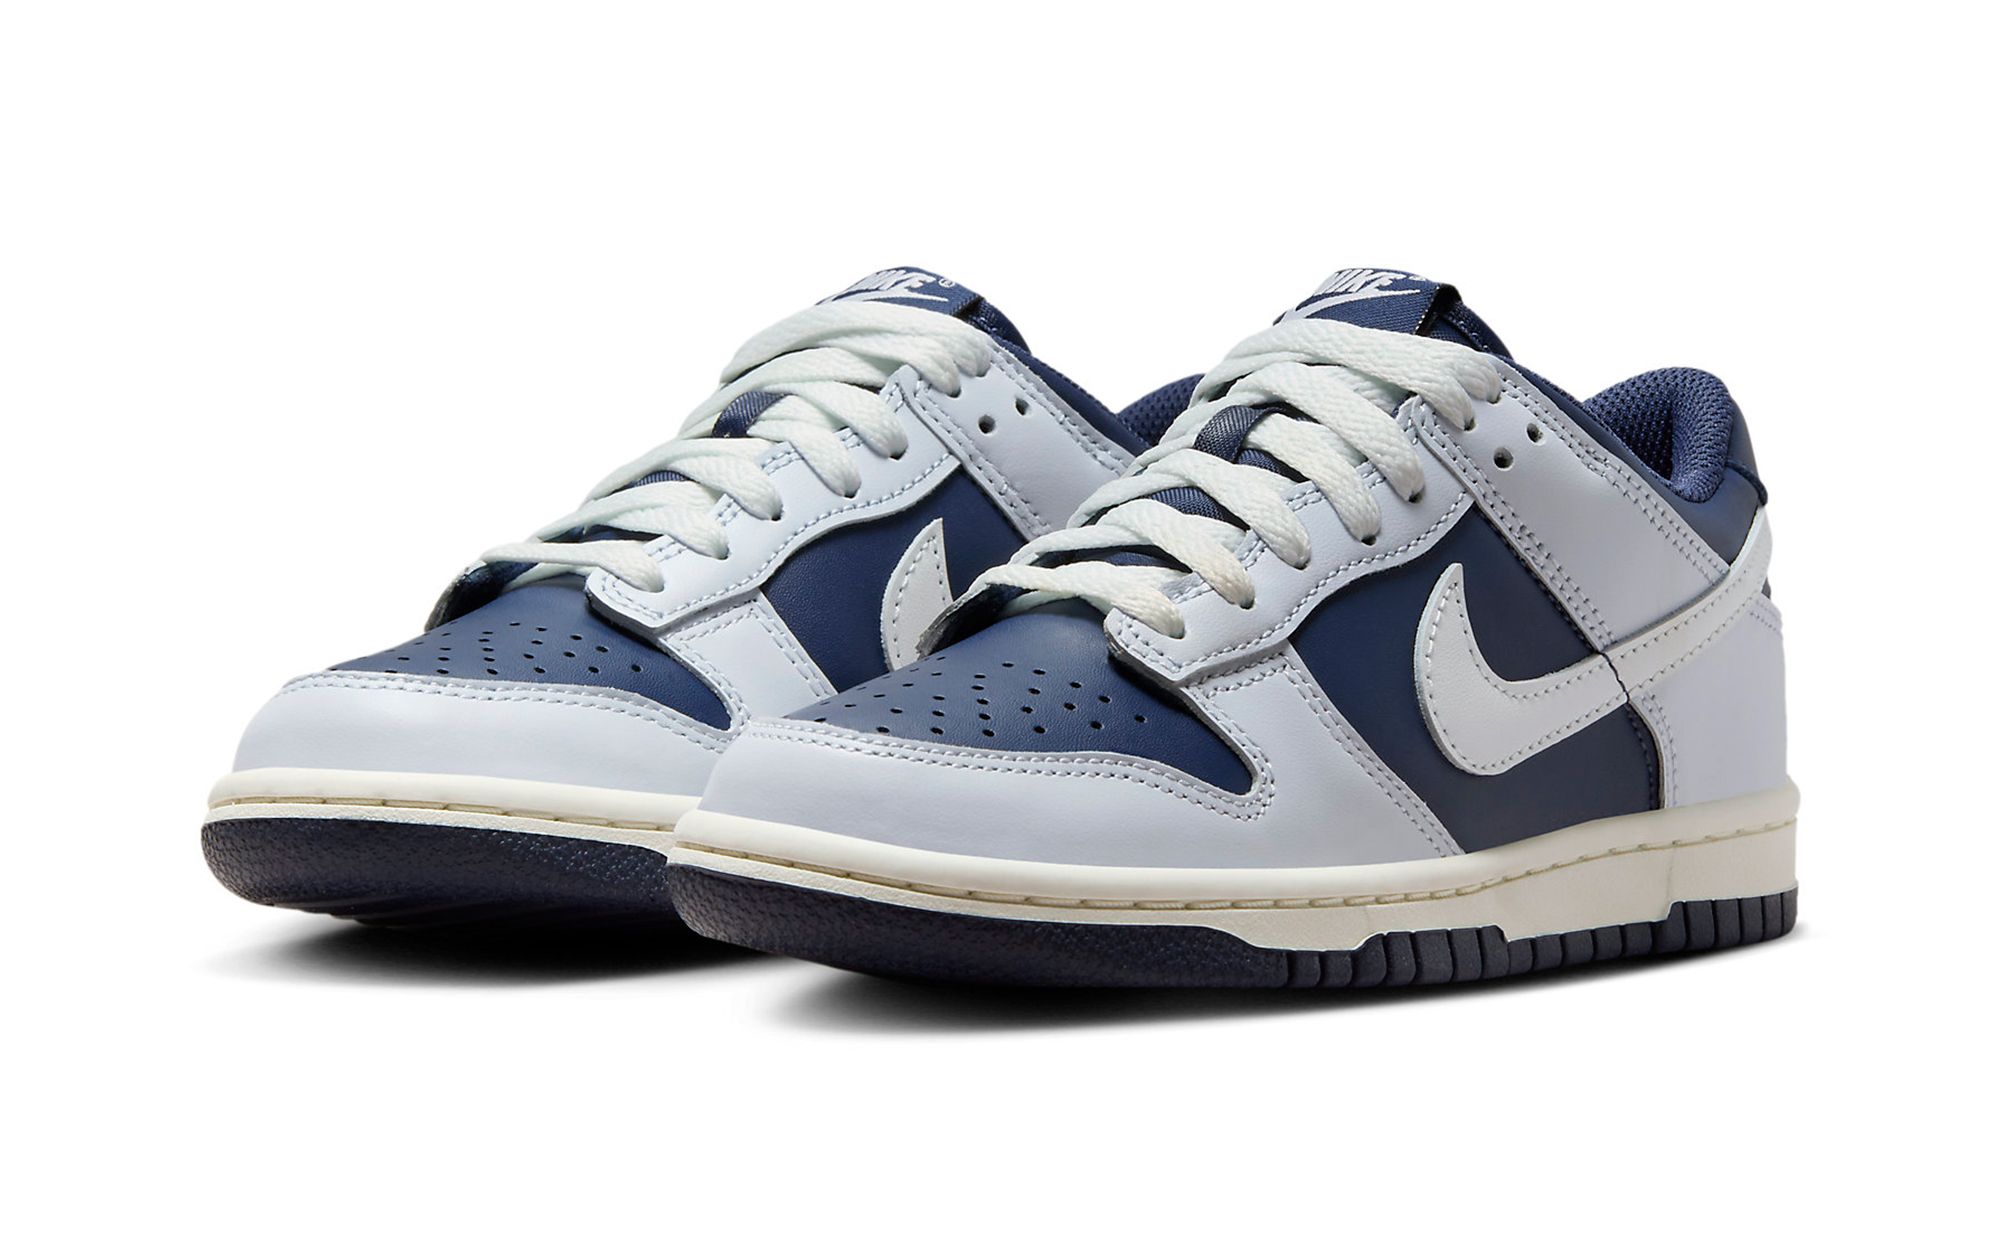 Football Grey and Midnight Navy Make Their Mark on the Nike Dunk 